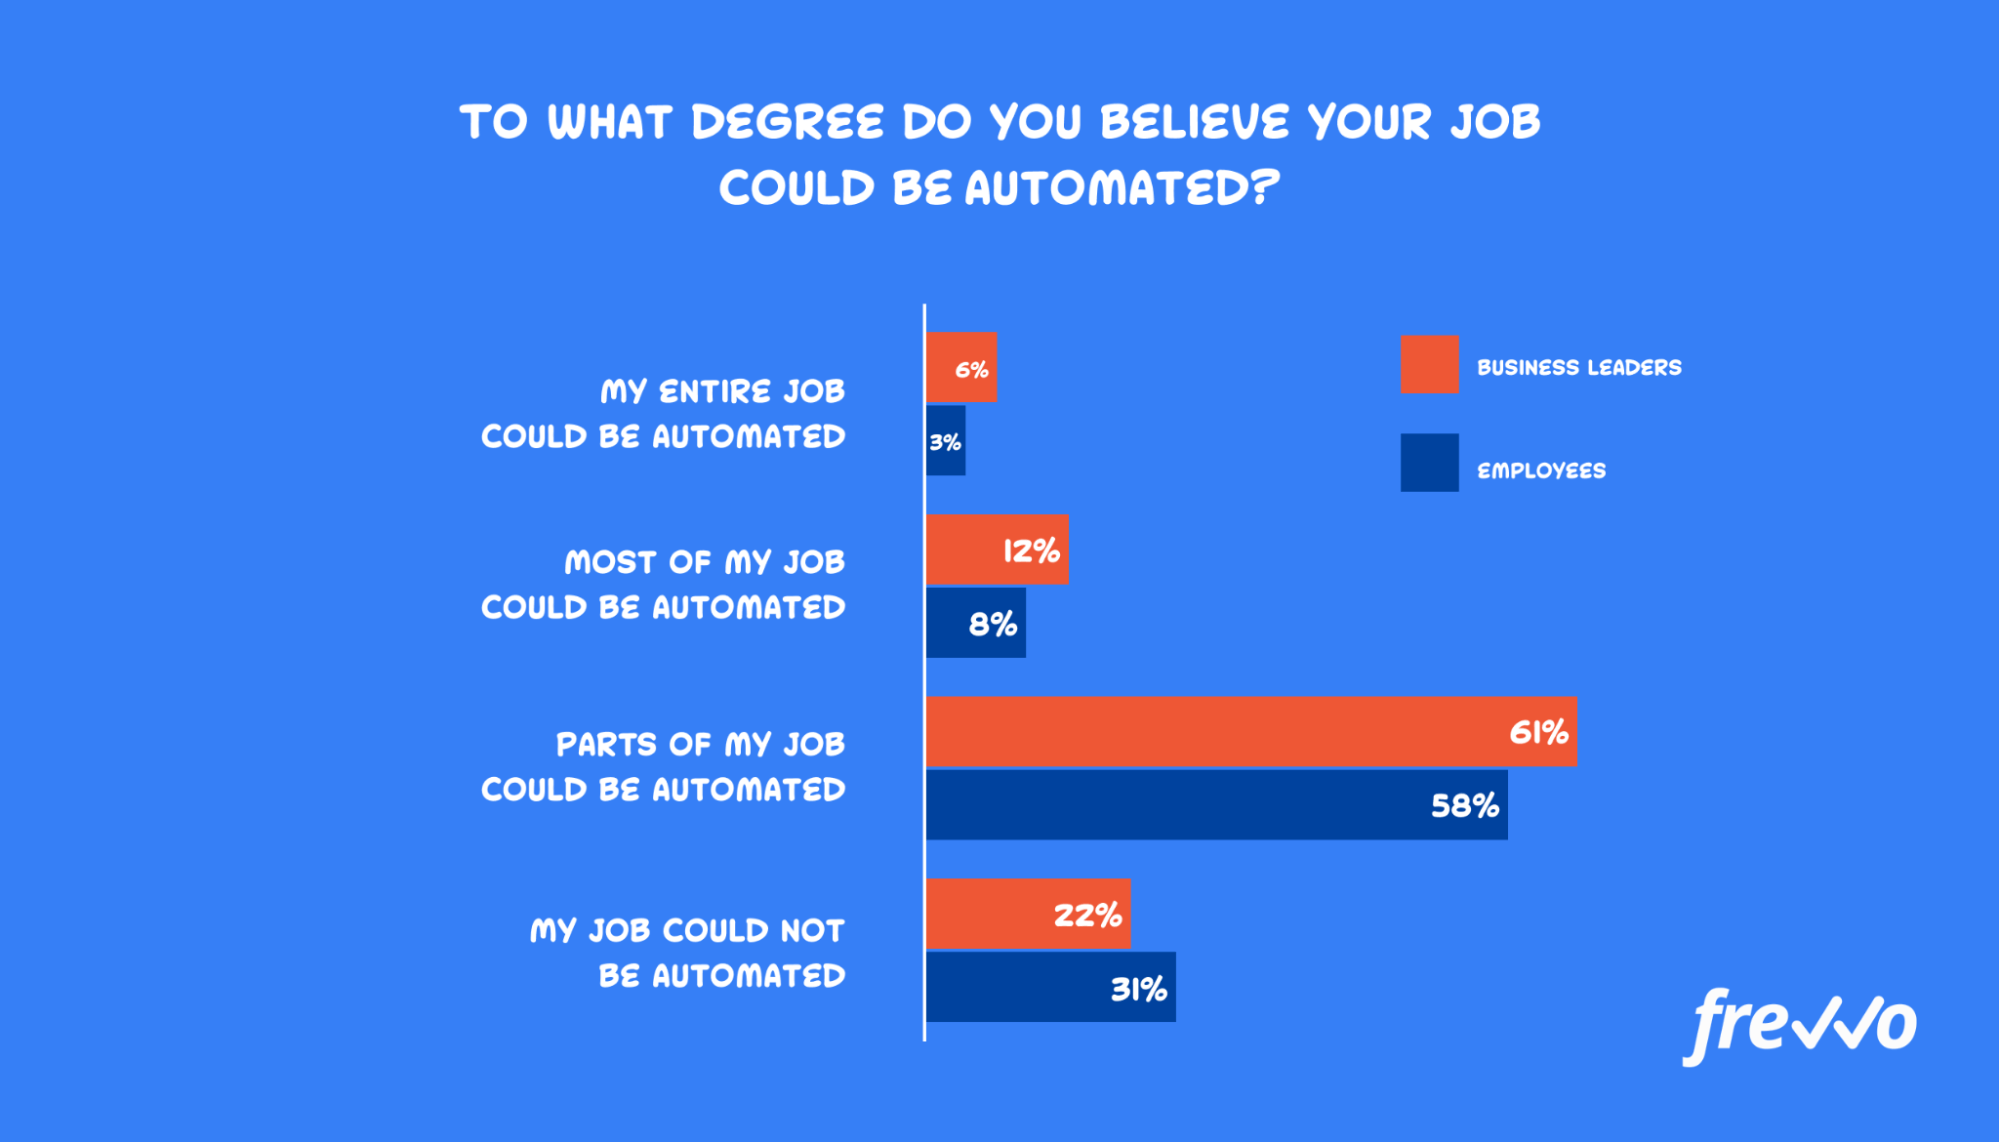 Business leaders who believe their jobs can be automated